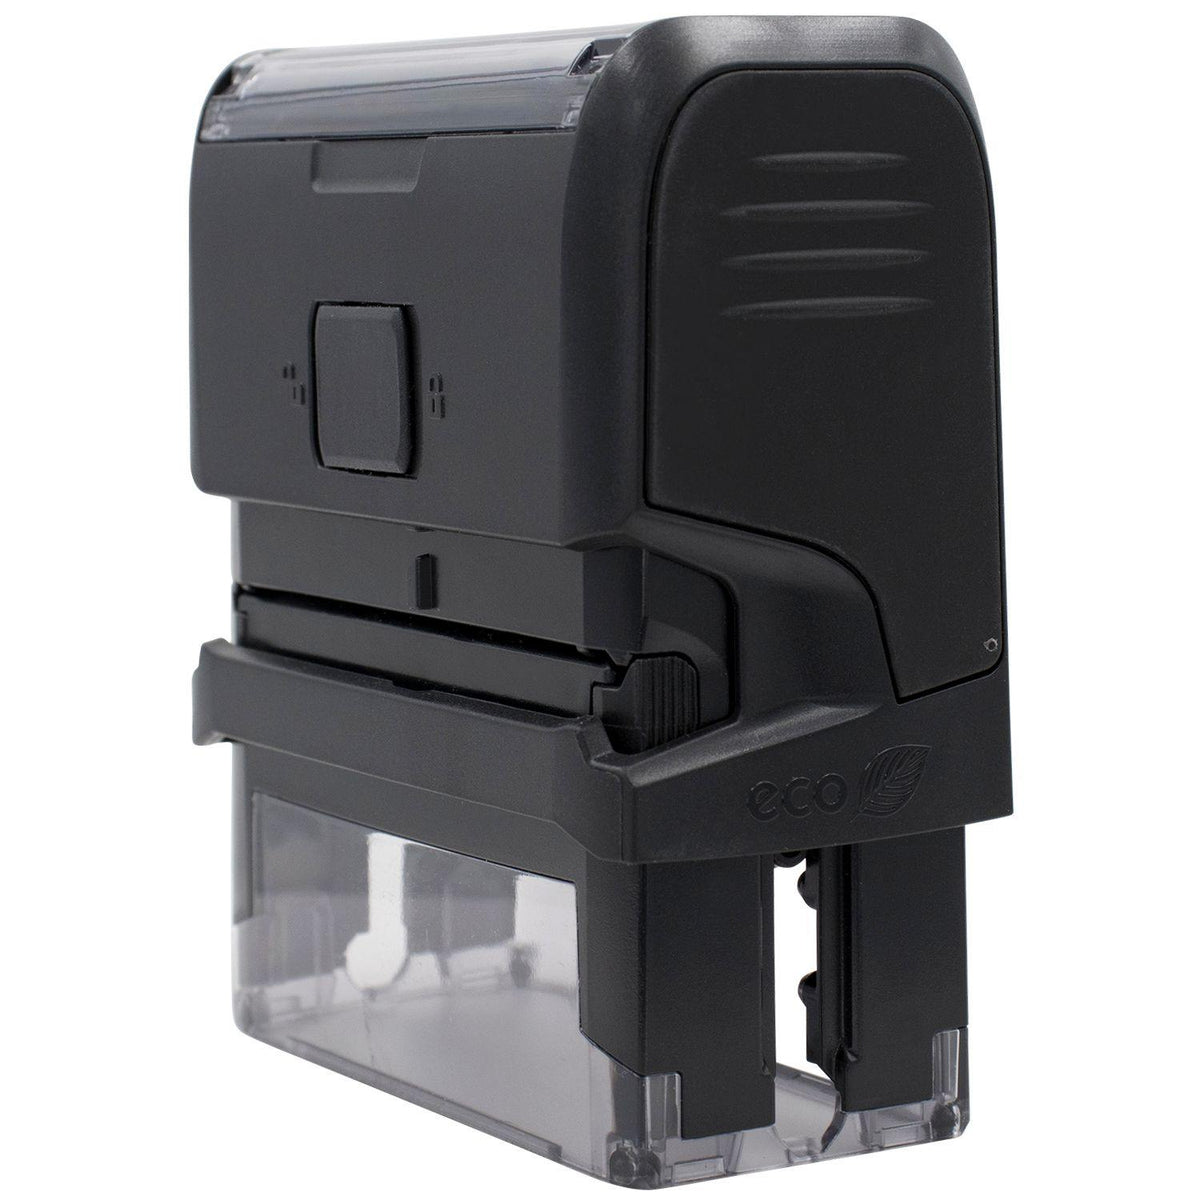 Self-Inking First Class Mail International Stamp - Engineer Seal Stamps - Brand_Trodat, Impression Size_Small, Stamp Type_Self-Inking Stamp, Type of Use_Postal &amp; Mailing